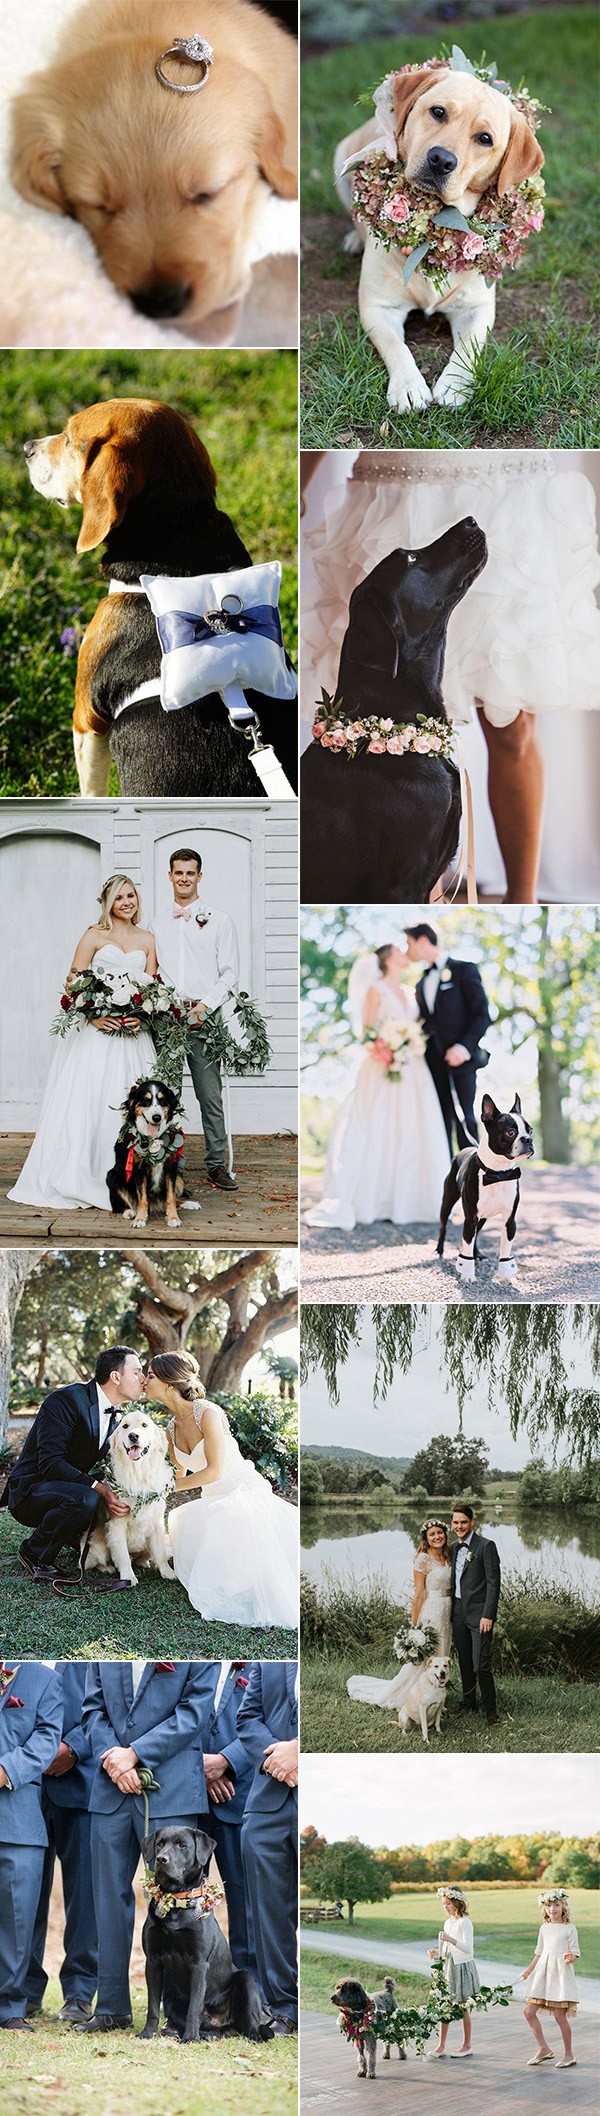 cute wedding photo ideas with dogs